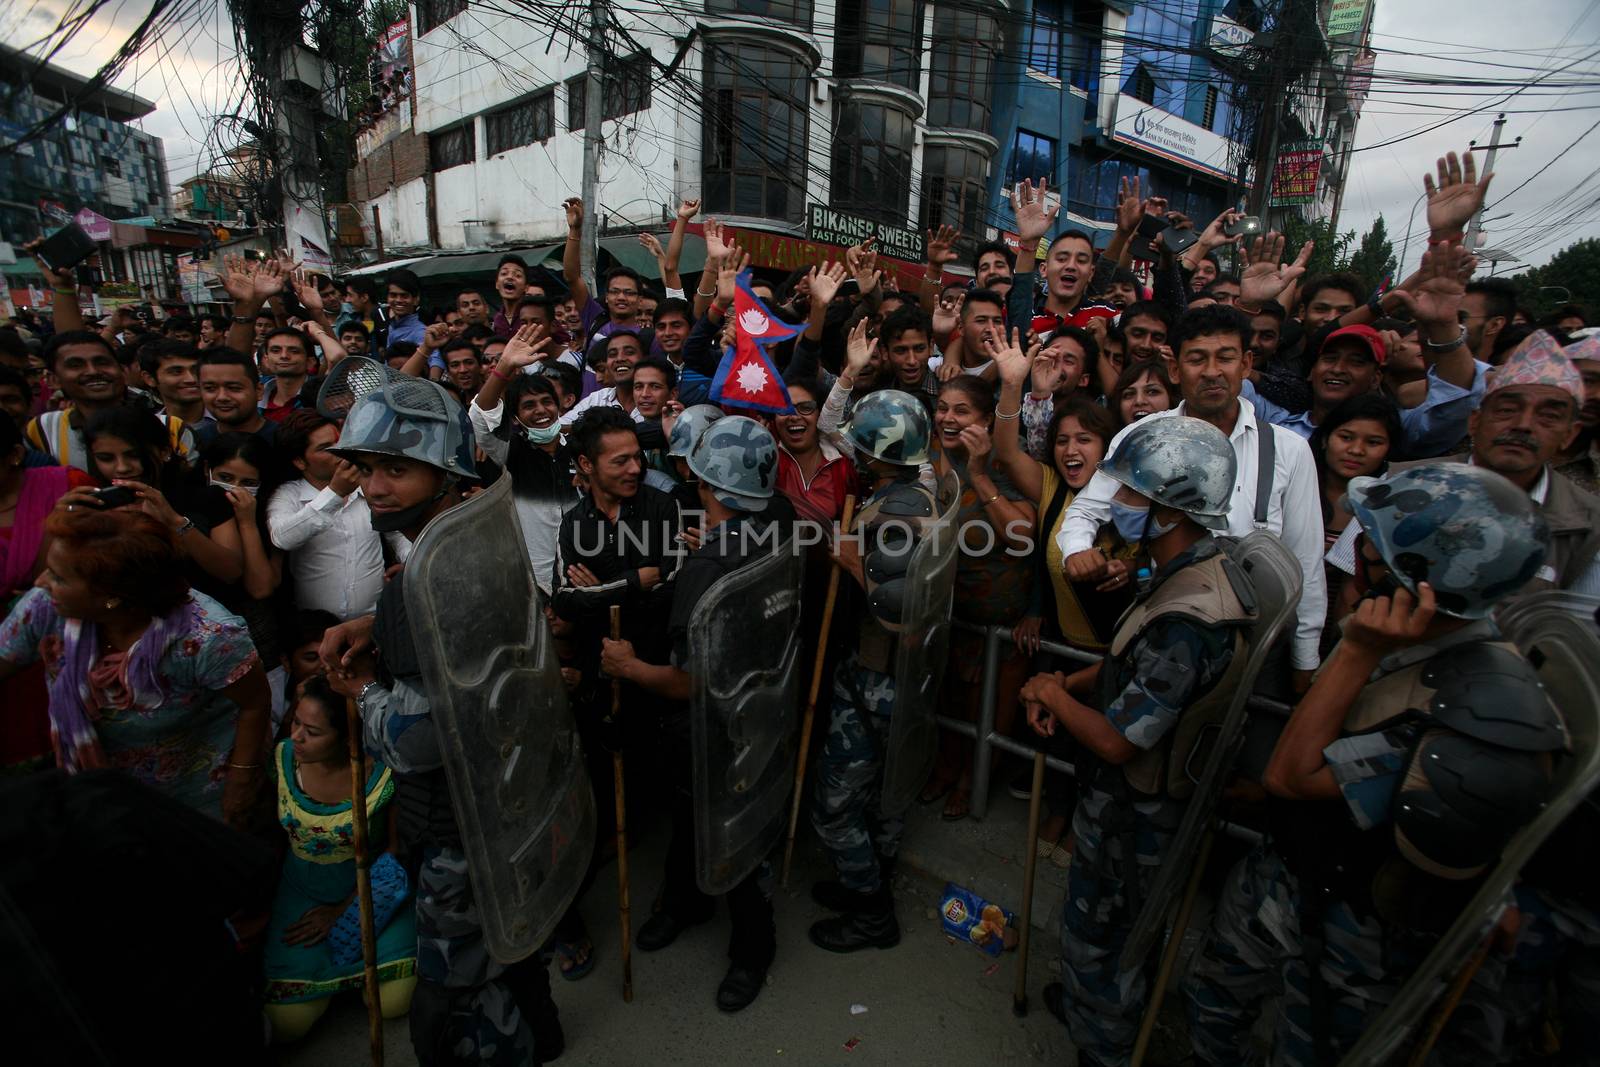 NEPAL, Kathmandu: After years of debate, Nepal adopted a new constitution on September 20, 2015, prompting scores of residents to celebrate near the constituent assembly building in Kathmandu. Out of the 598 members of the Constituent Assembly, 507 voted for the new constitution, 25 voted against, and 66 abstained in a vote on September 16, 2015. The event was marked with fireworks and fesitivities, but also with protests organized by parties of the Tharu and Madhesi ethnic communities.